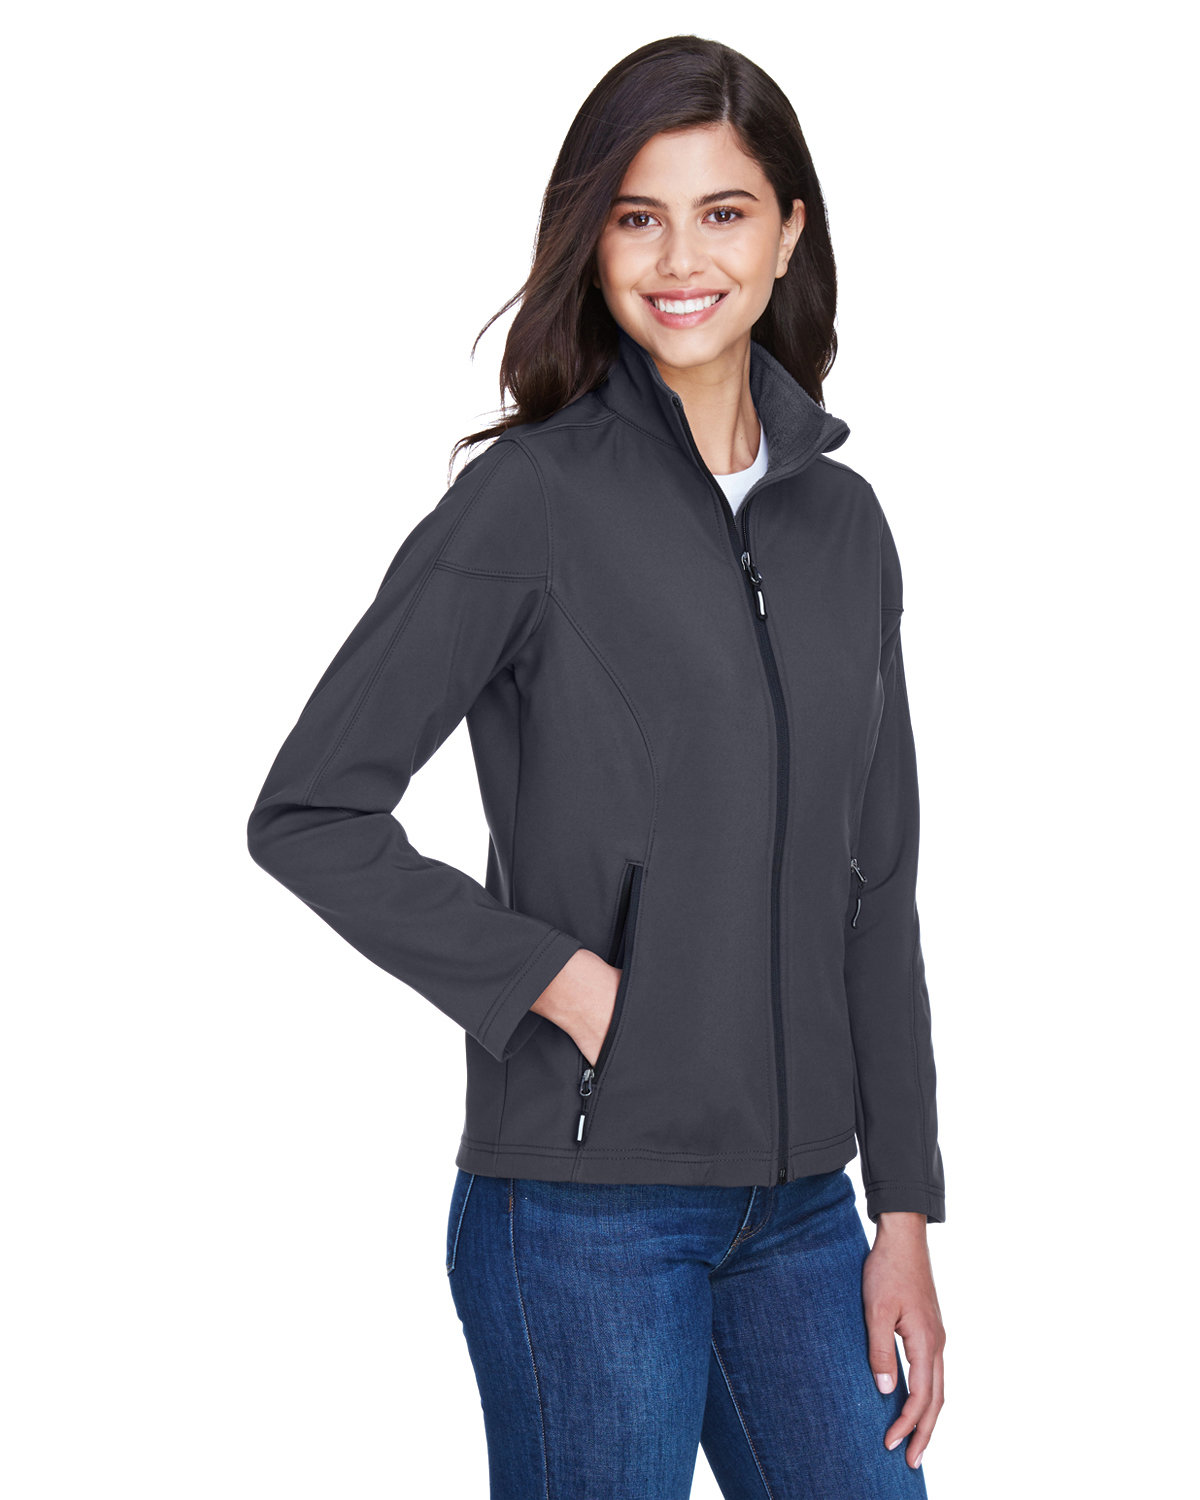 Core365 Ladies' Cruise Two-Layer Fleece Bonded Soft Shell Jacket ...